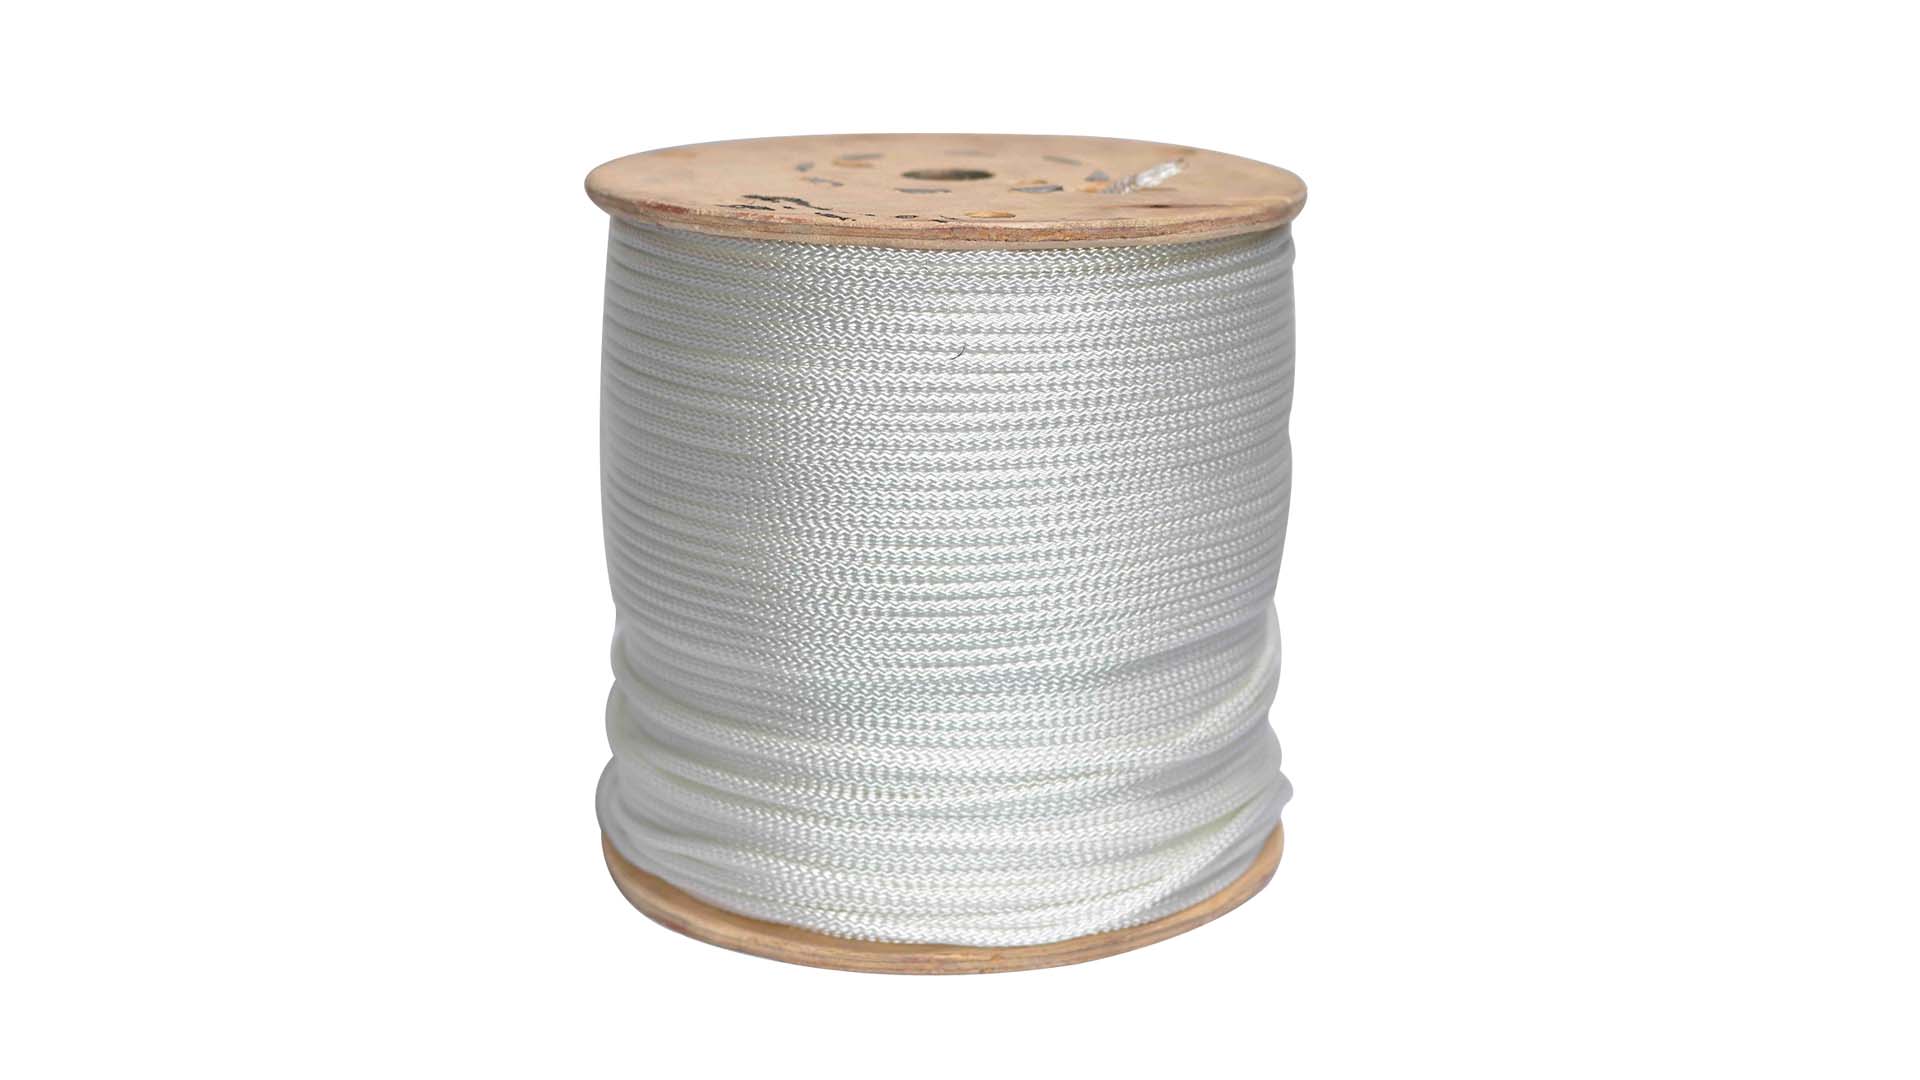 https://www.reboundproducts.com/wp-content/uploads/2018/05/Spotting-rope-spool-1.jpg